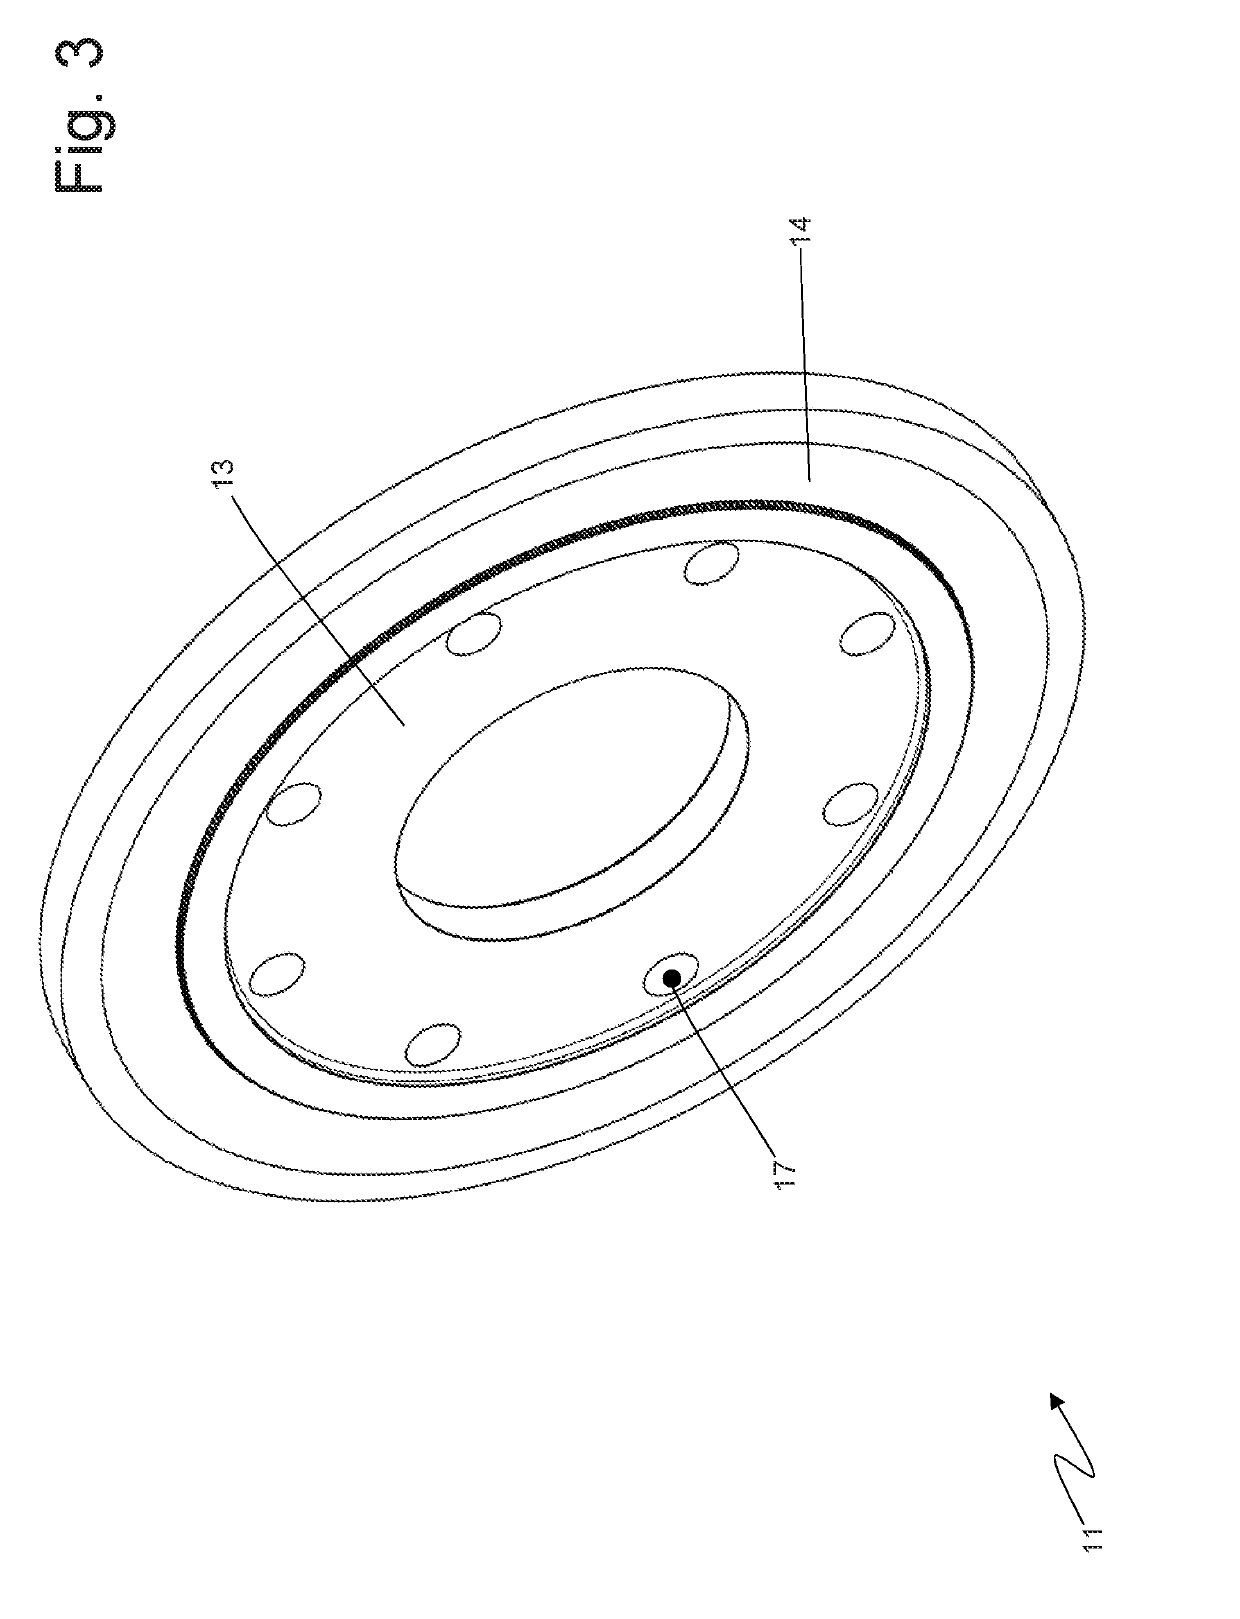 Rotor for a rotary electric machine